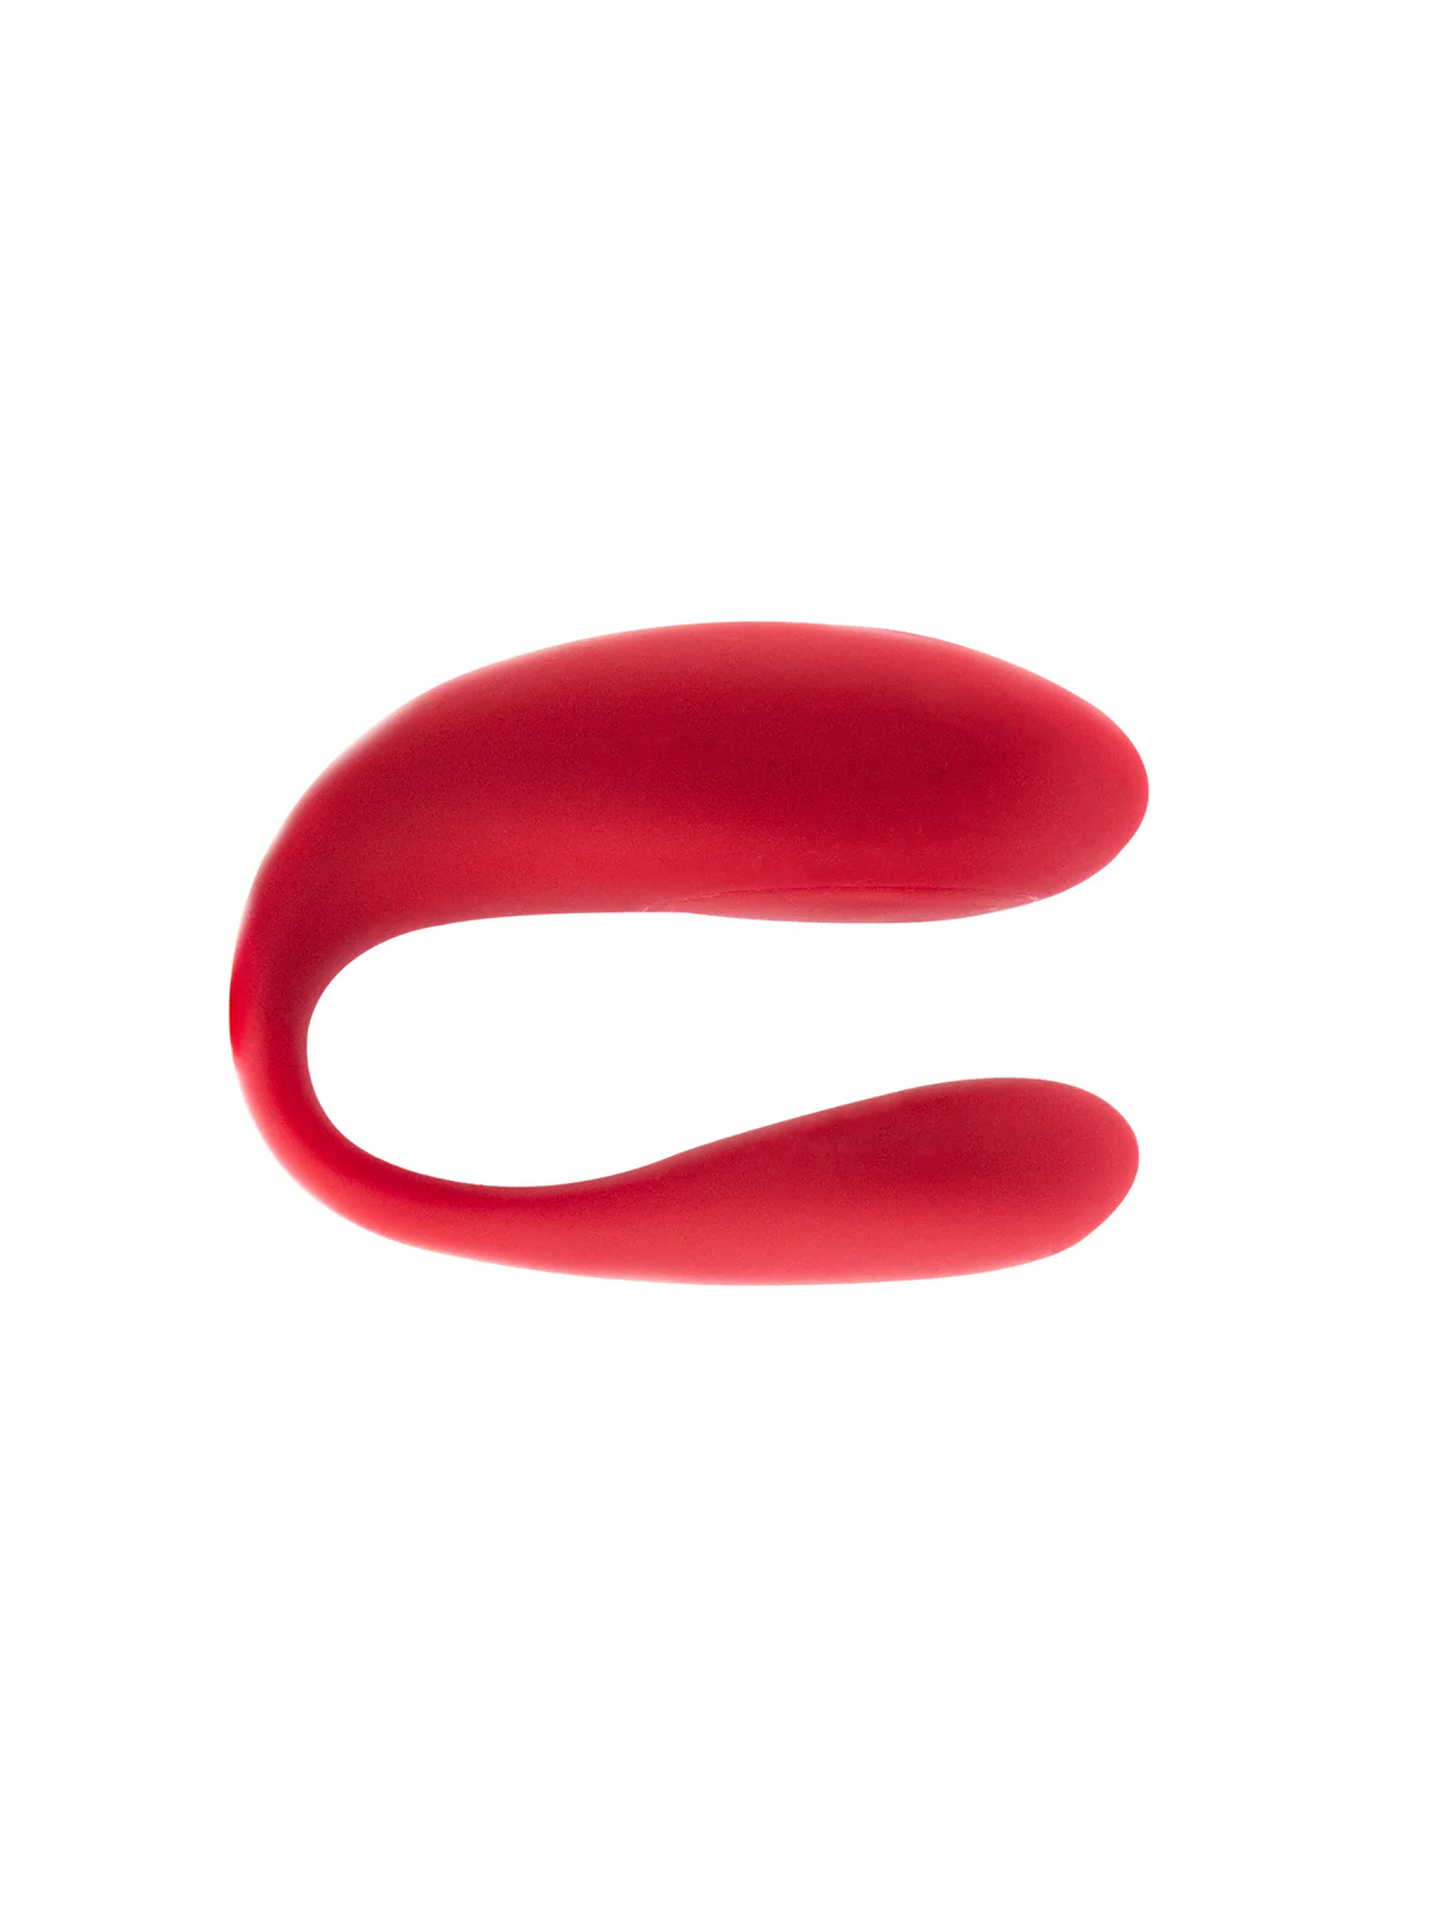 We-Vibe Special Edition in Red